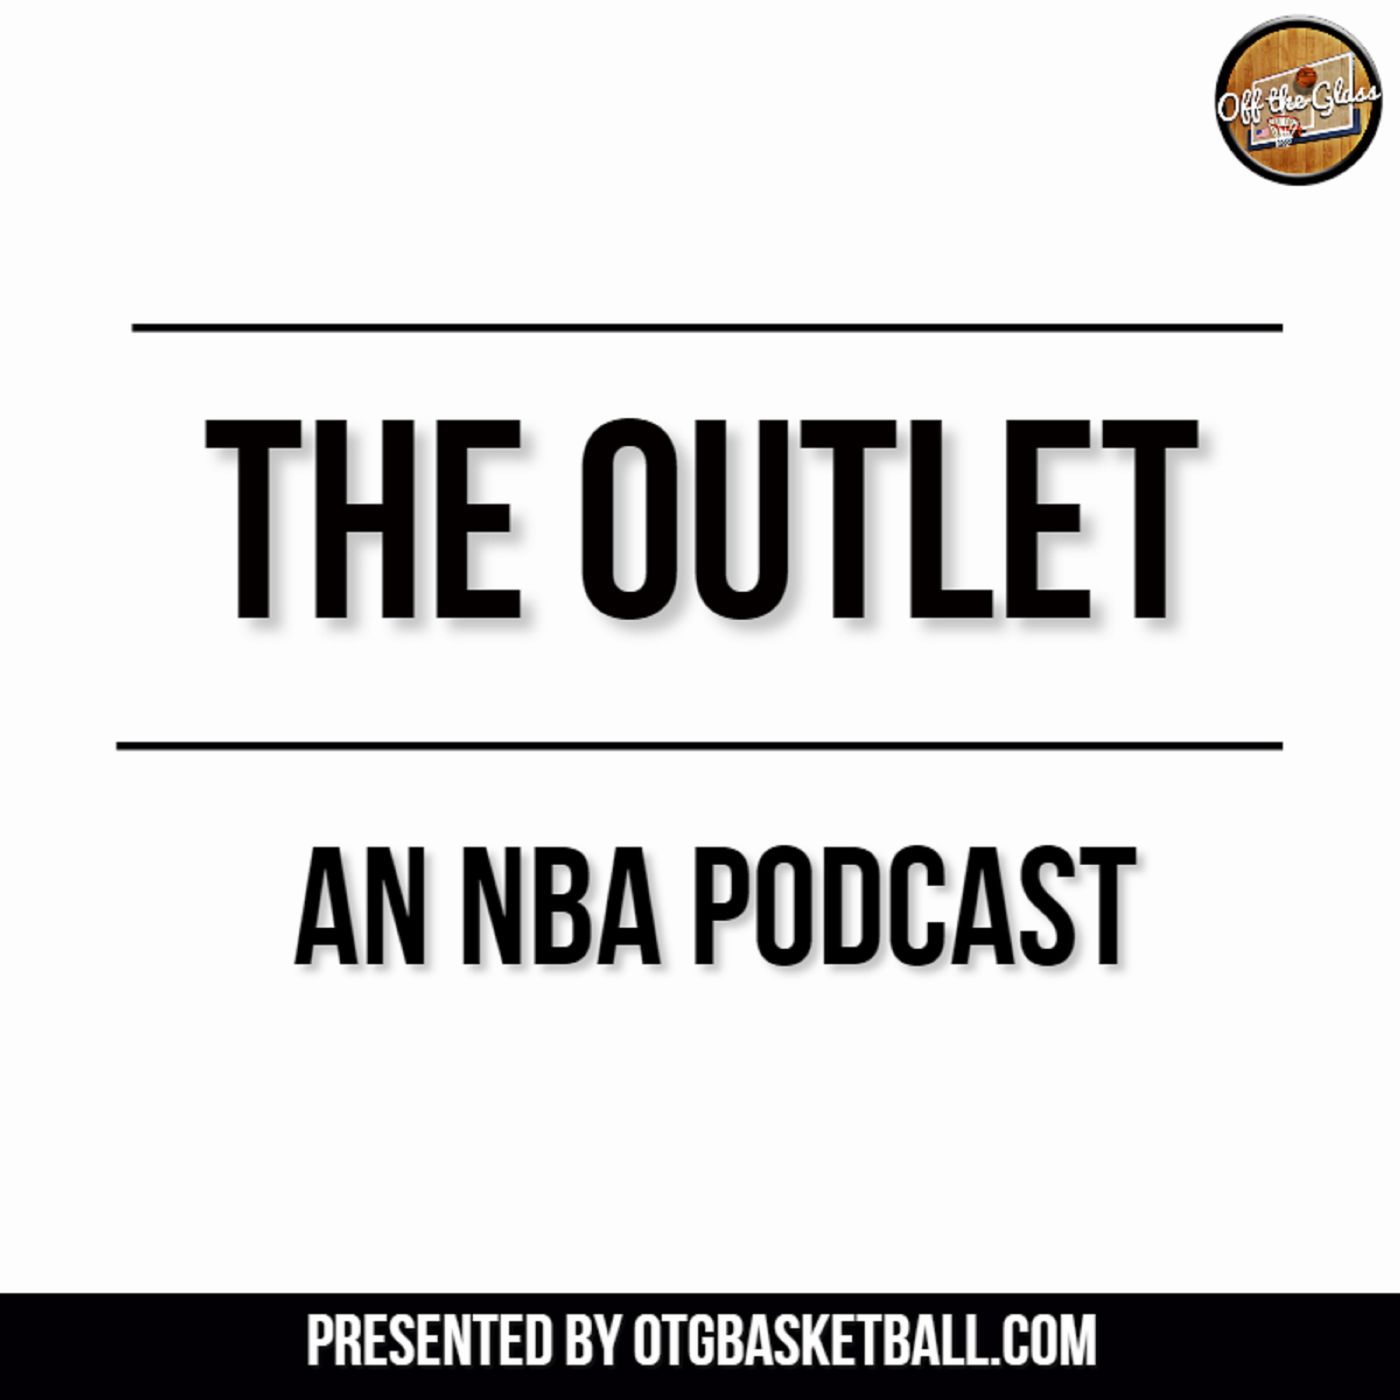 Quick Thoughts On the NBA's Return